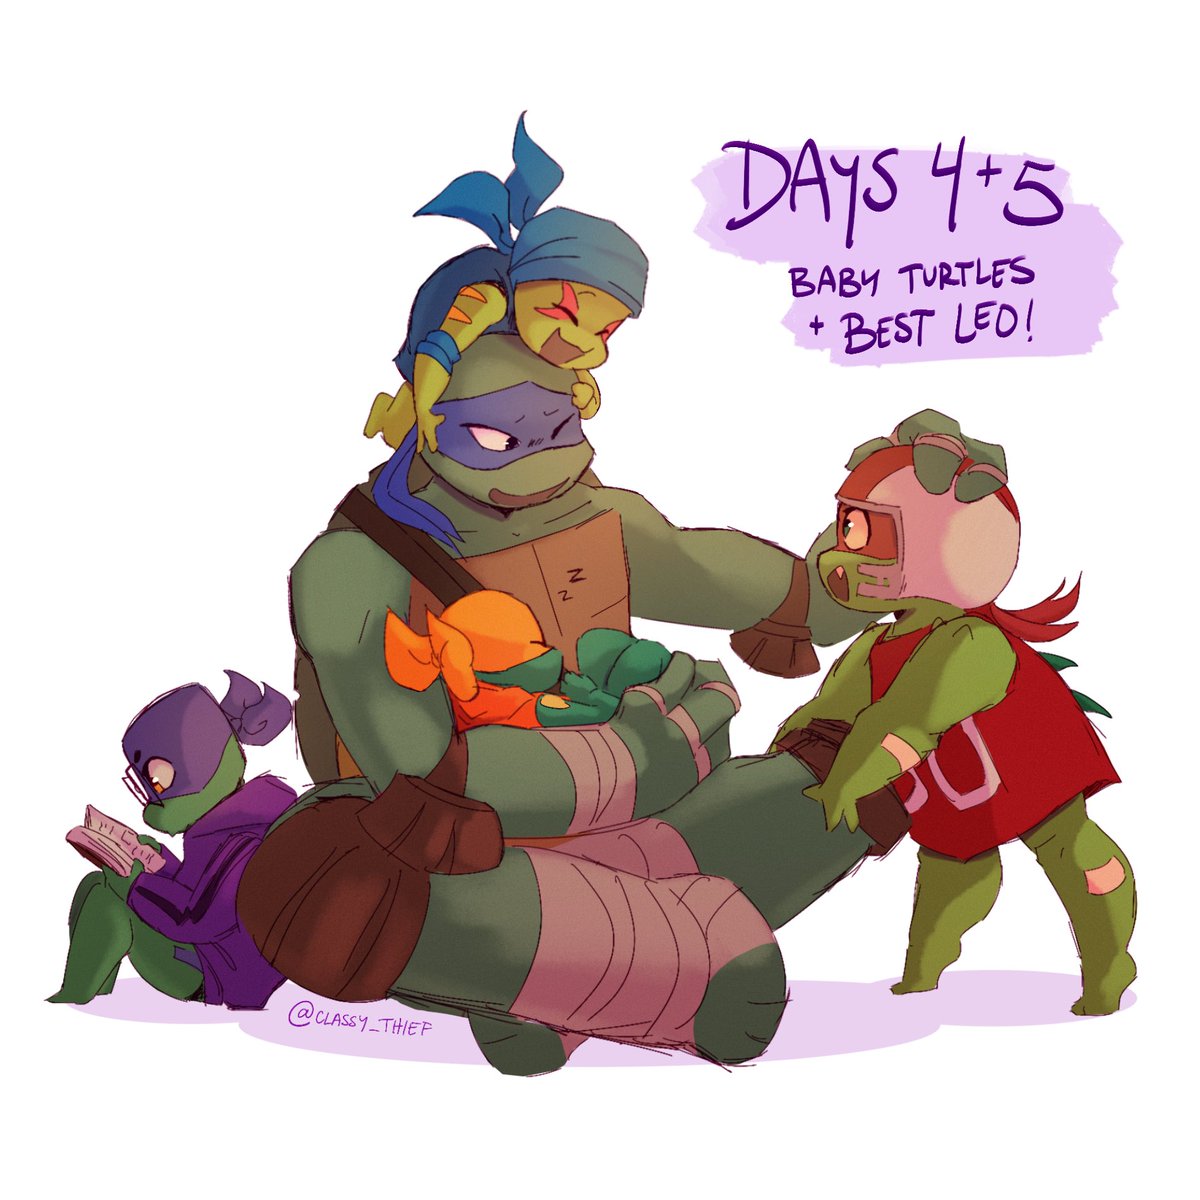 🌺 combined days 4 n 5 in order to catch up 🤞 it's 2012 leo babysitting the turtle tots 😊

#tmnt2012 #rottmnt #TMayNT